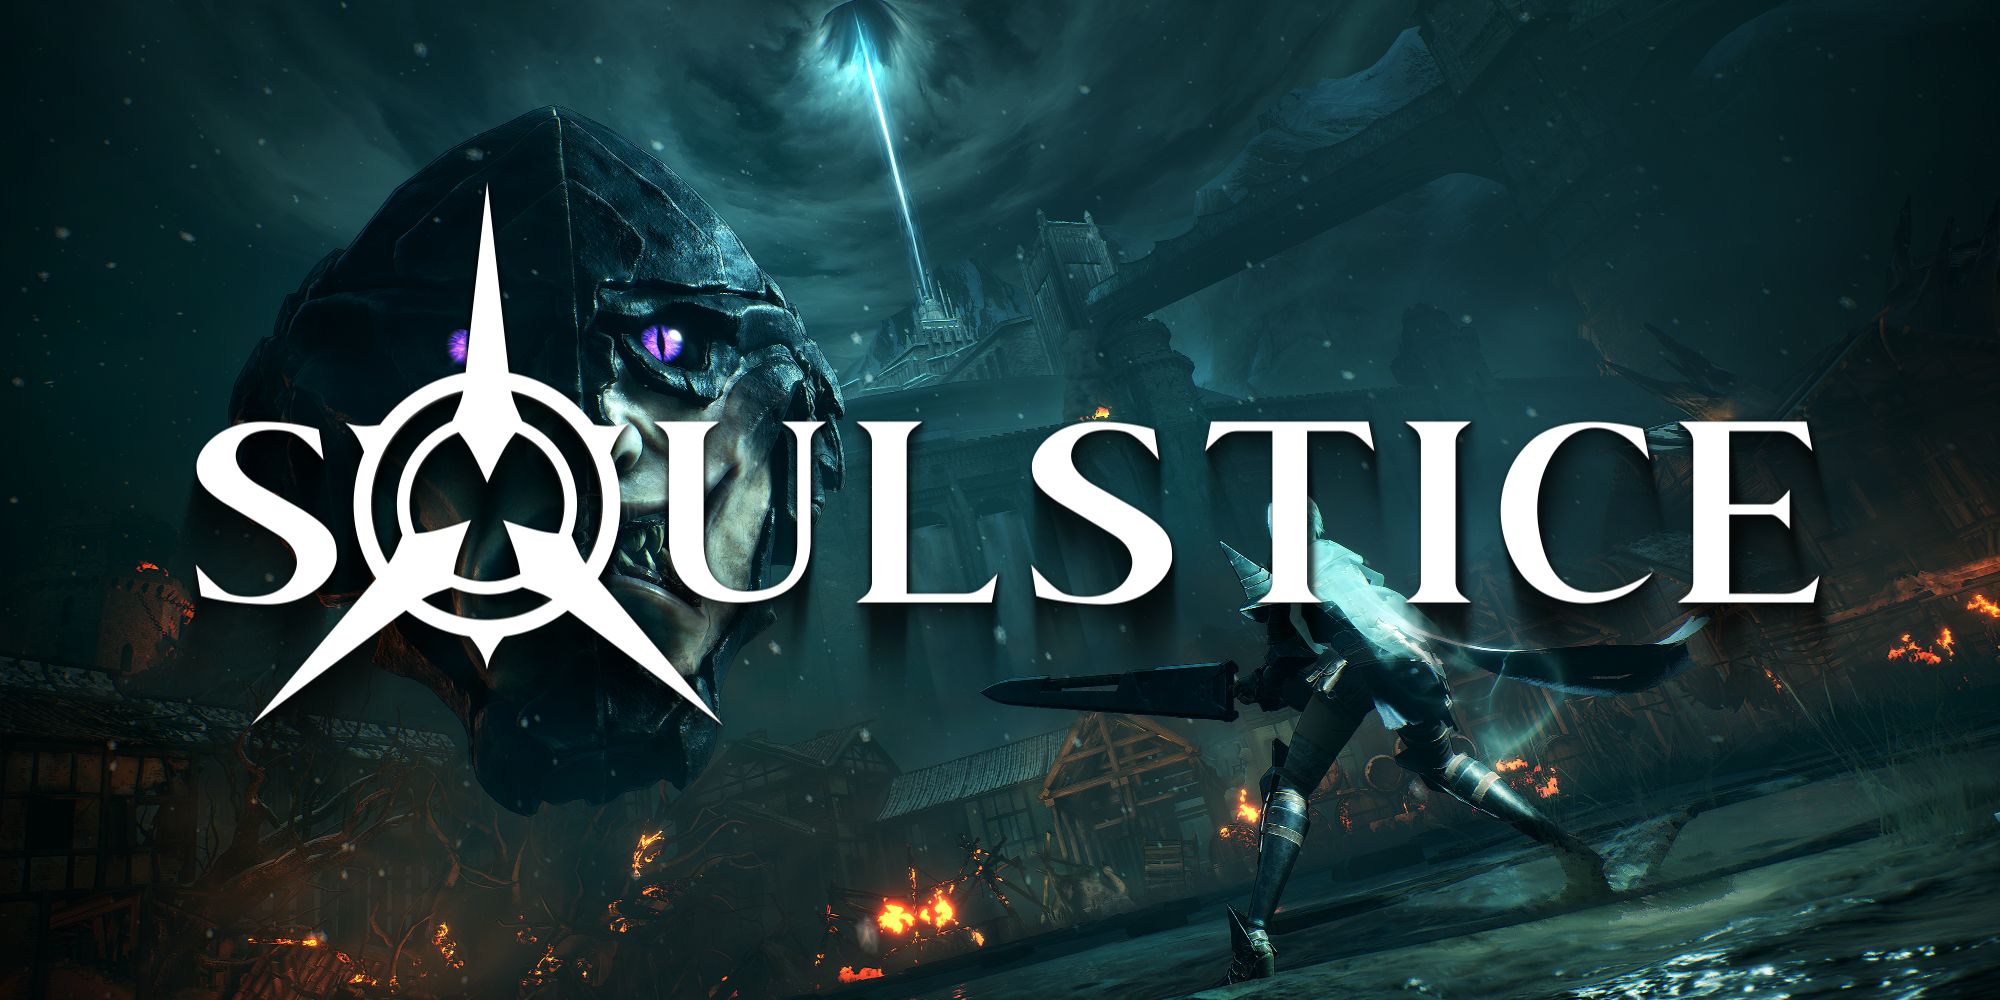 Soulstice looks like it wants to be the next Devil May Cry, and gets